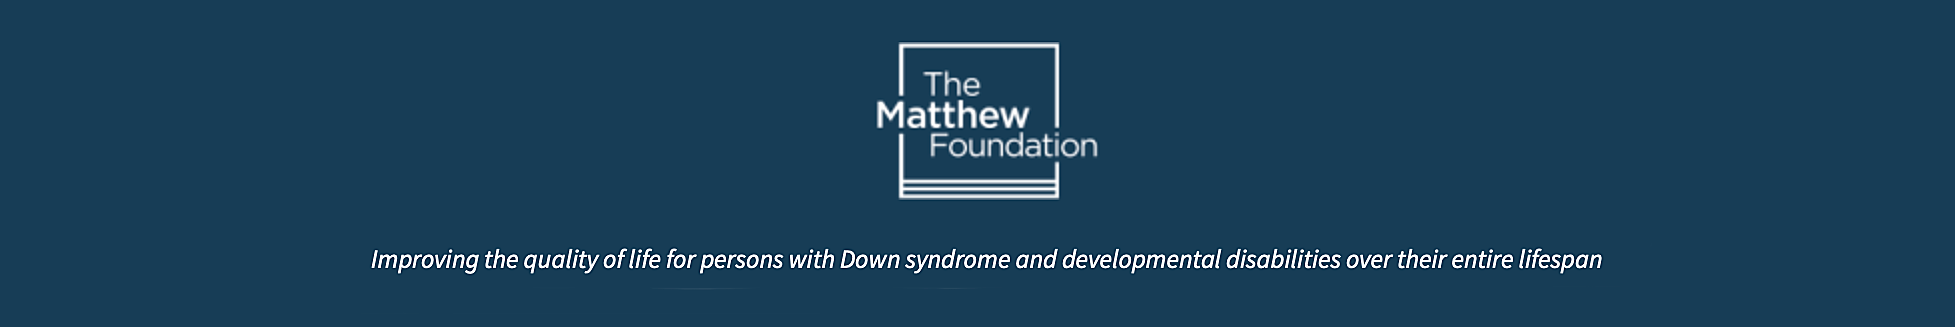 The Matthew Foundation – Improving the quality of life for persons with Down syndrome and developmental disabilities over their entire lifespan